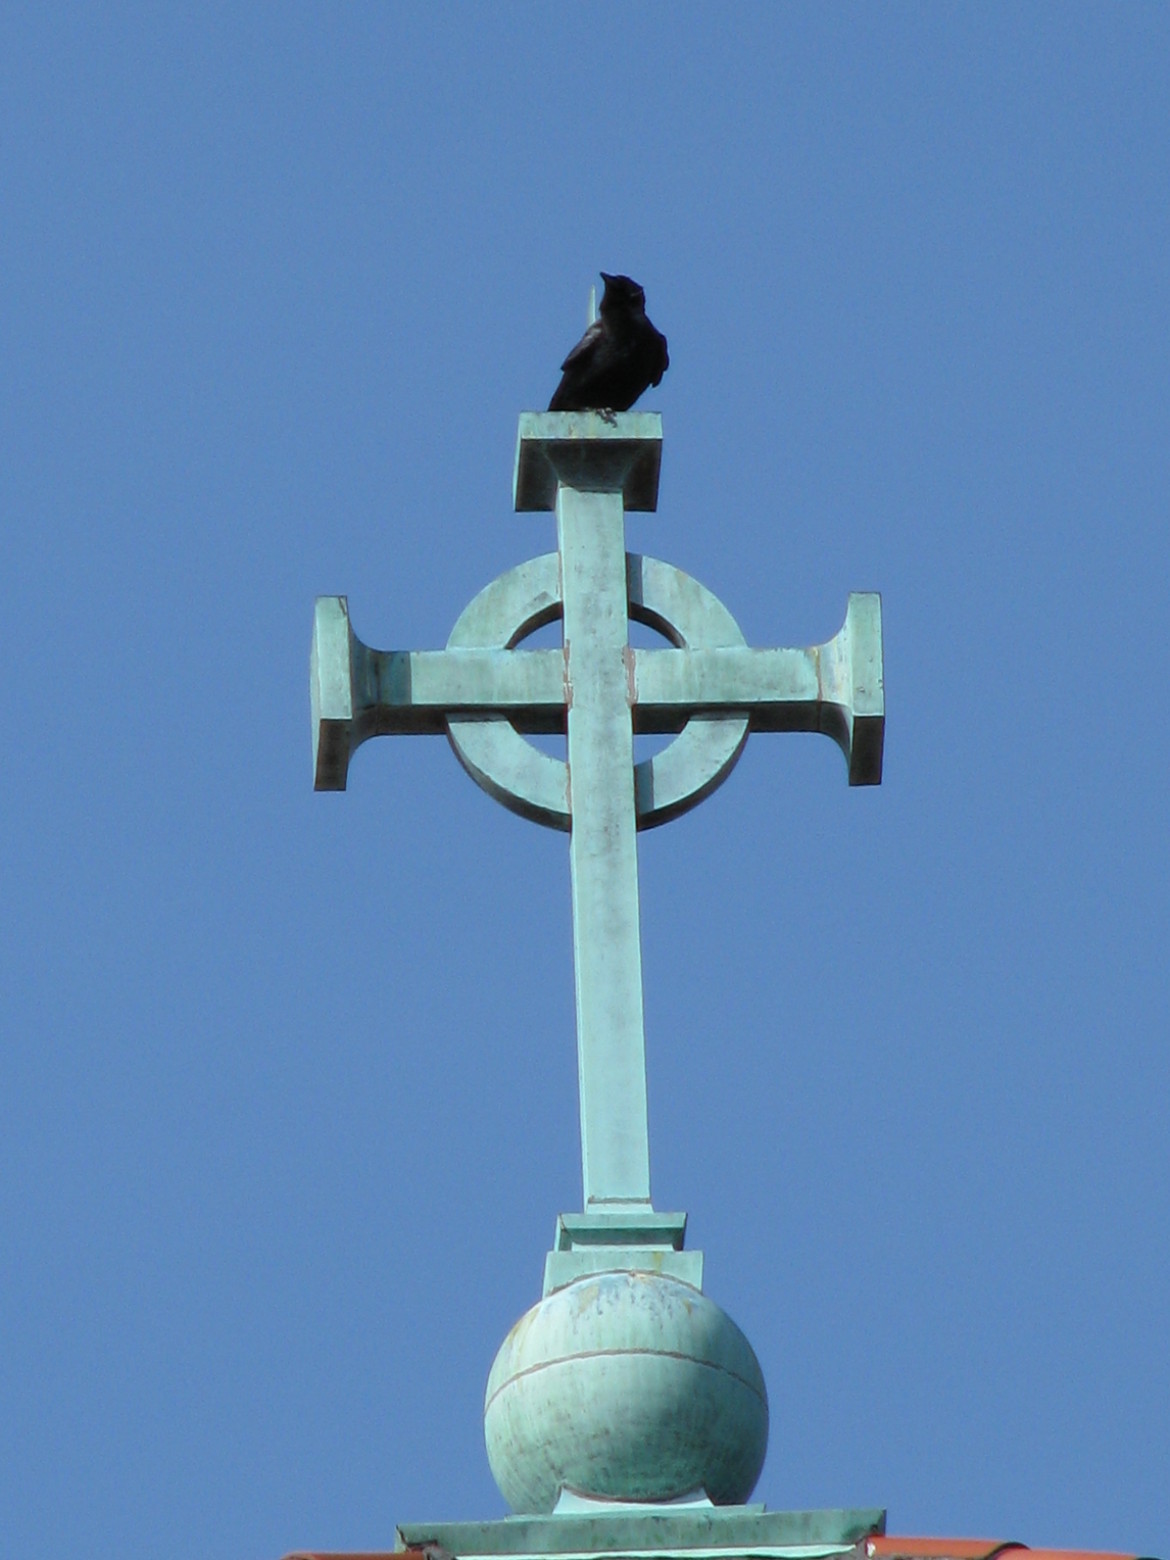 A seat on top of the copper cross must certainly afford a good view.